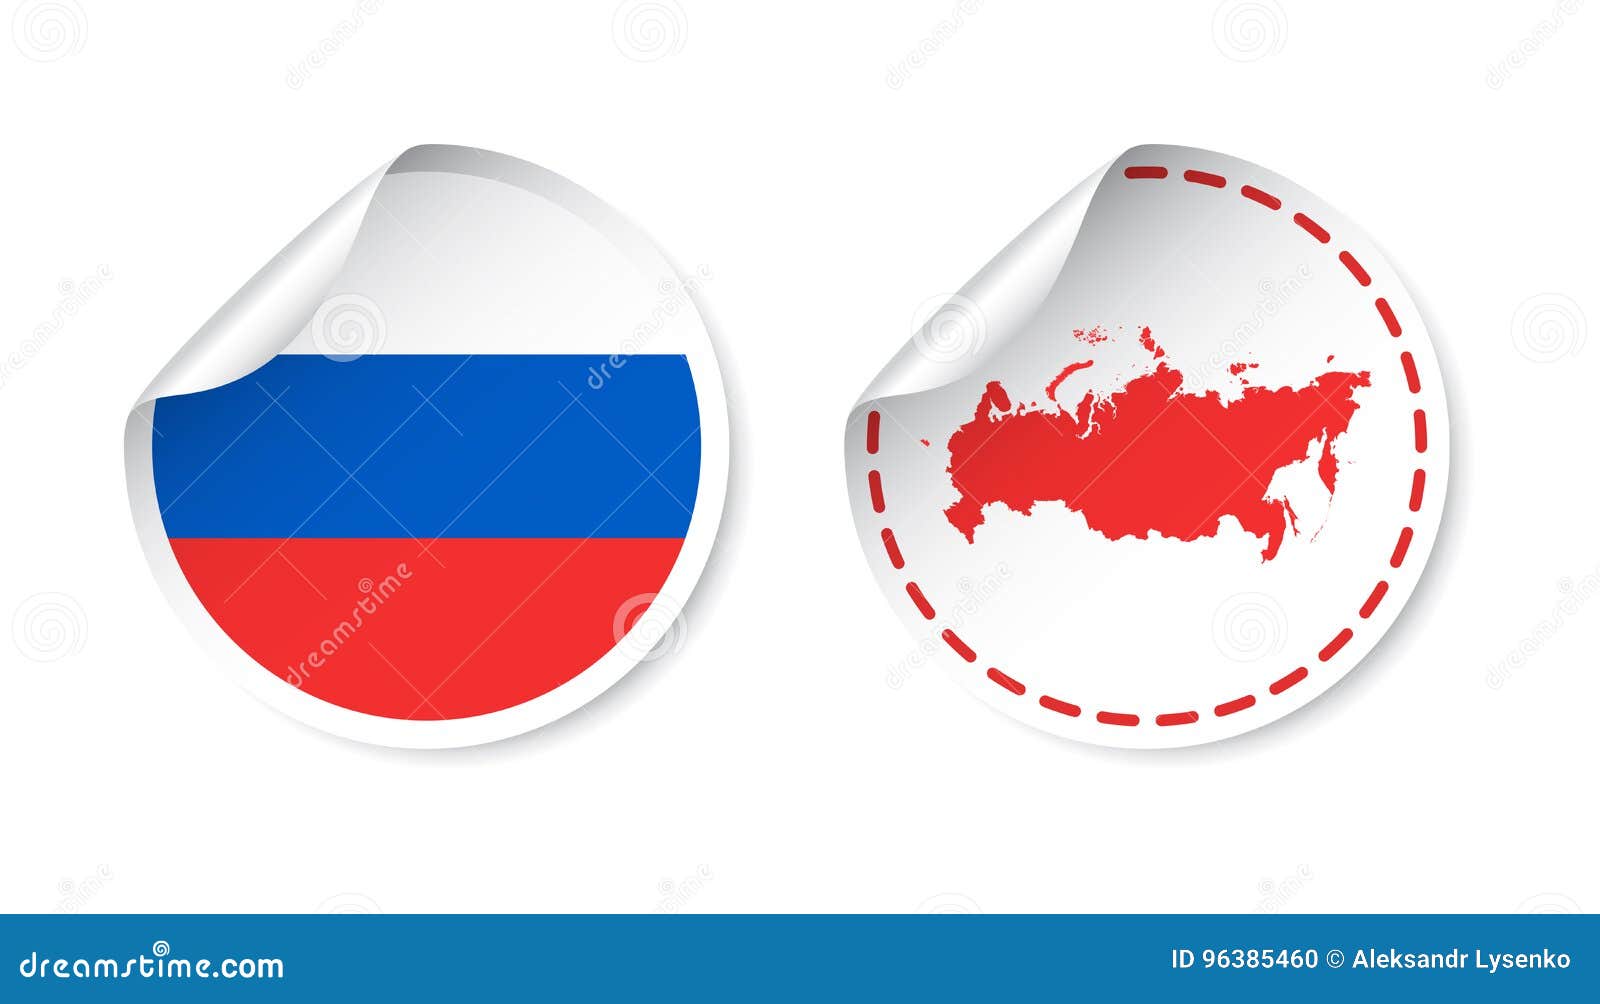 Printable Vector Map of Russia - Flag